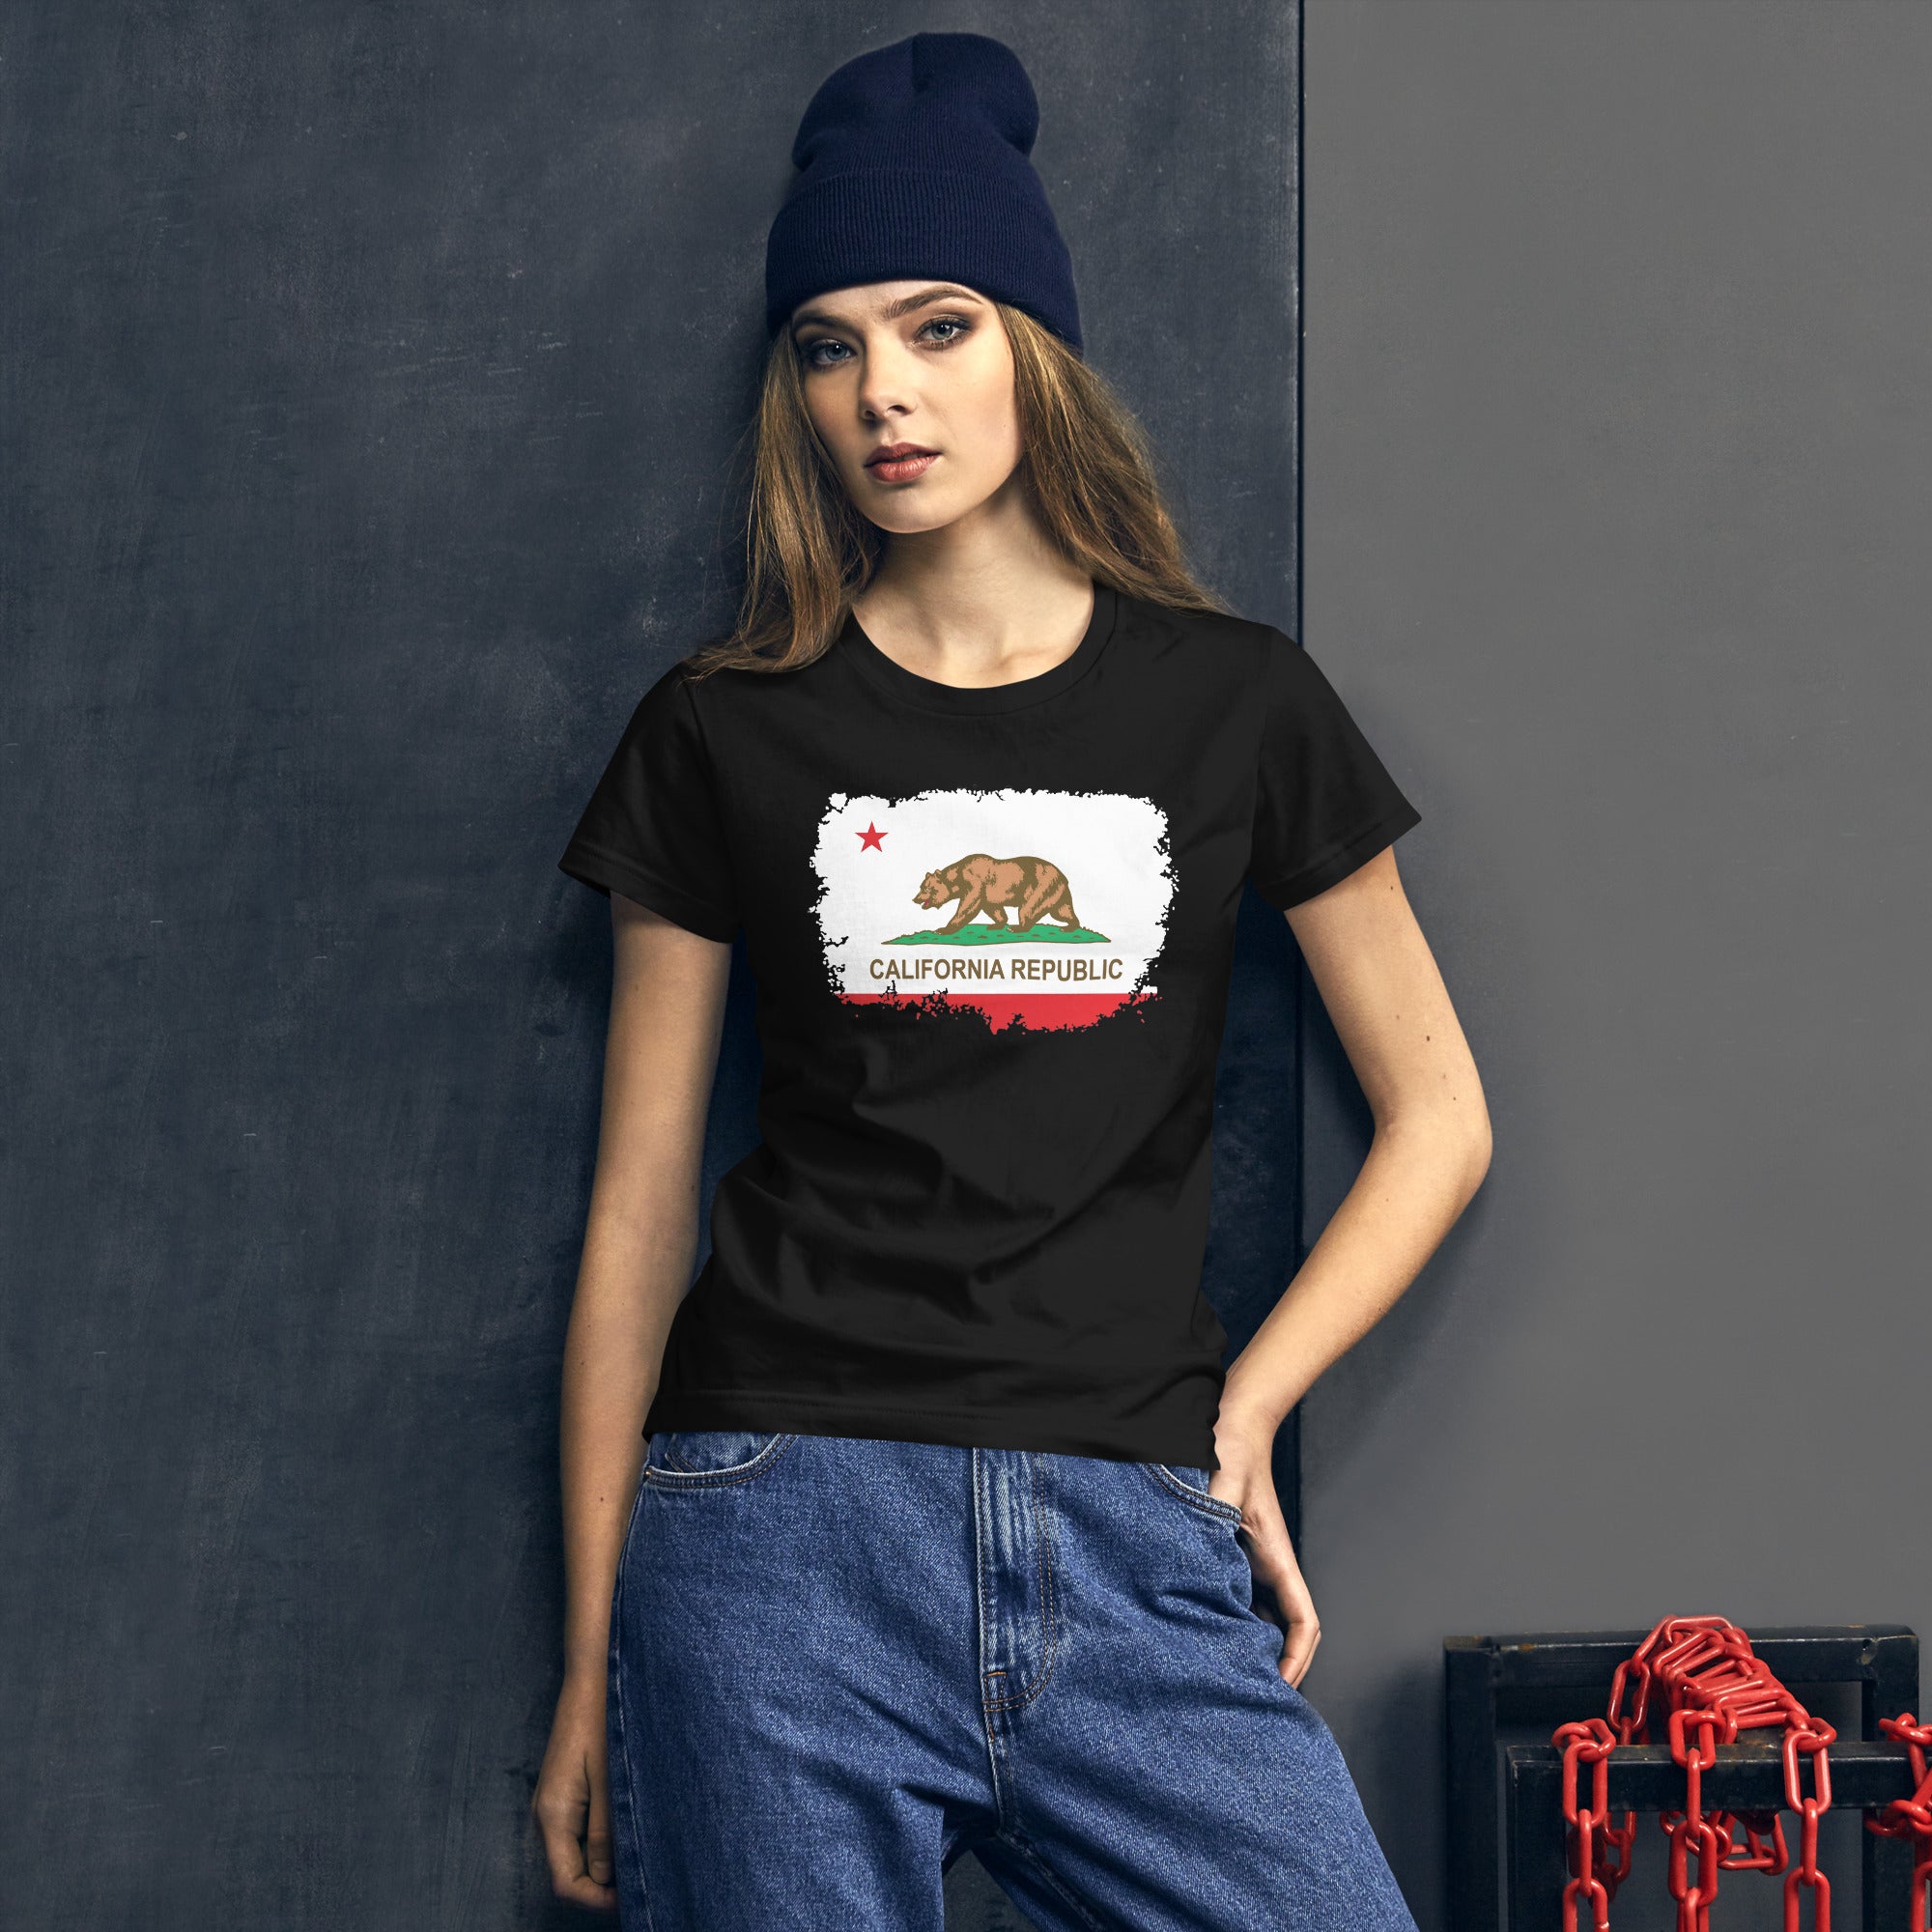 California State Flag Torn and battered Women's Short Sleeve Babydoll T-shirt